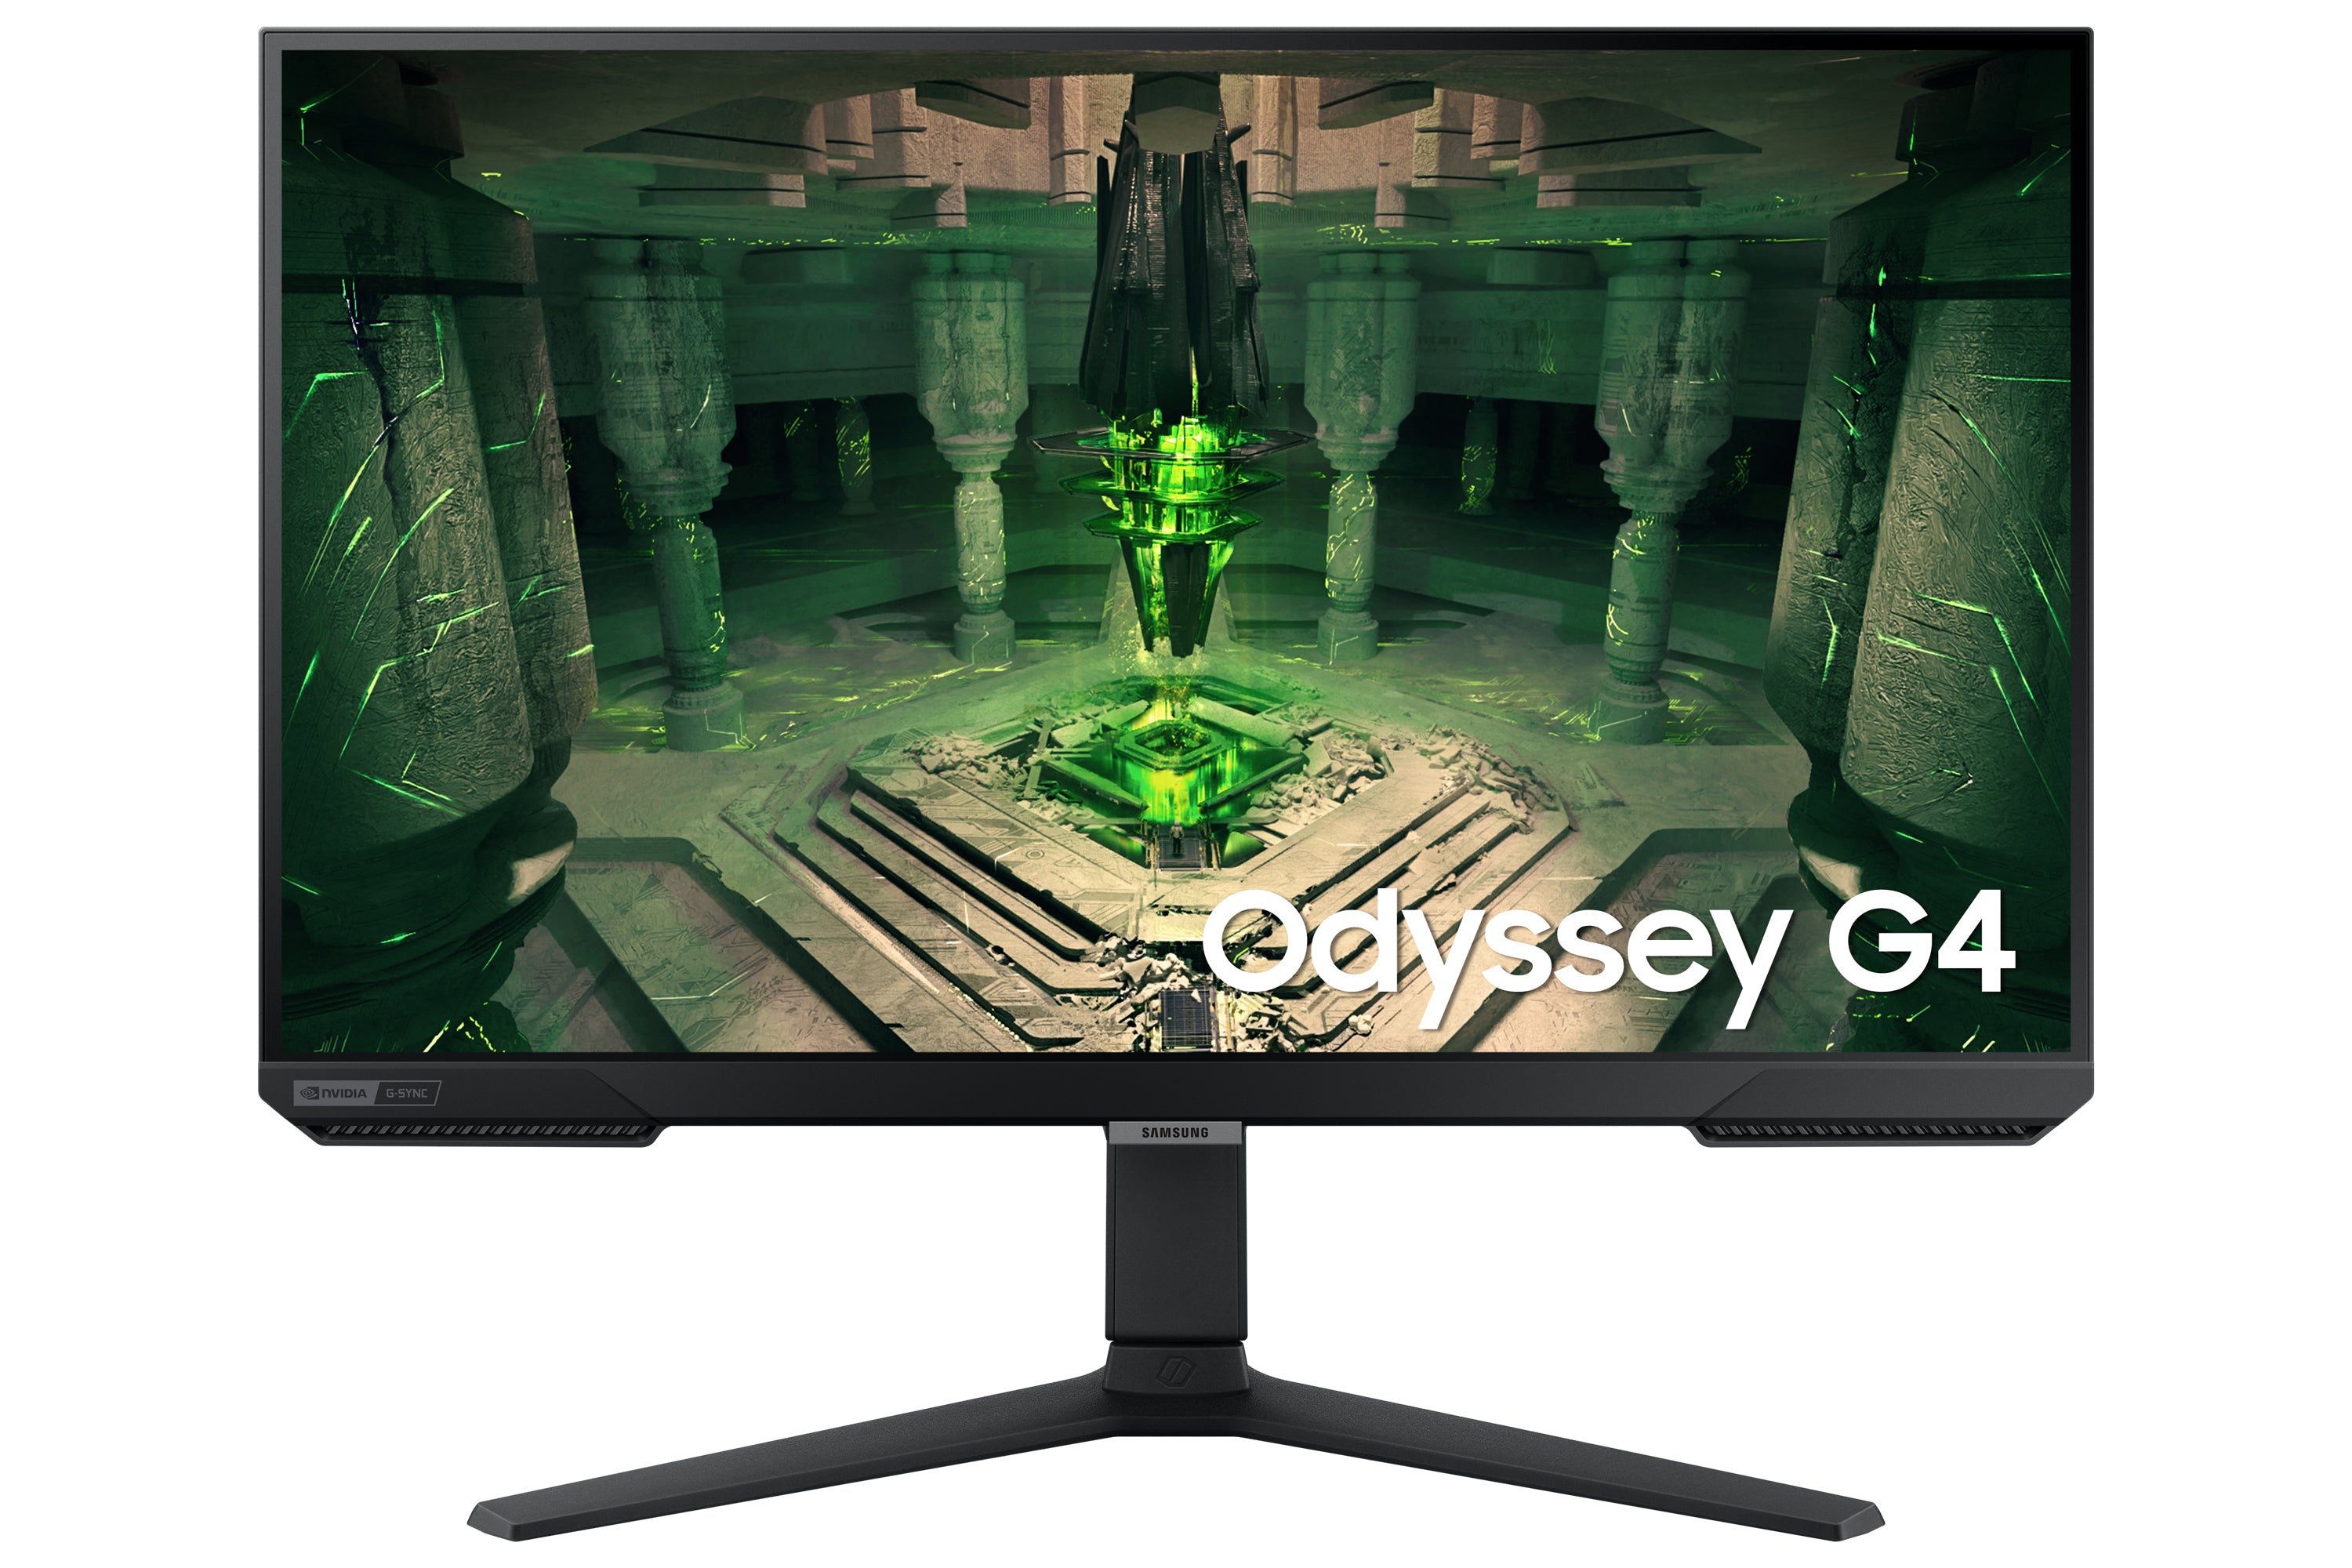 SAMSUNG ODYSSEY G4 S27BG400 27" 16:9 1920X1080 IPS, 1MS, 240HZ, HDR10 G-SYNC COMPATIBLE/FREESYNC PREMIUM, HDMIX2,DPX1, HAS STAND